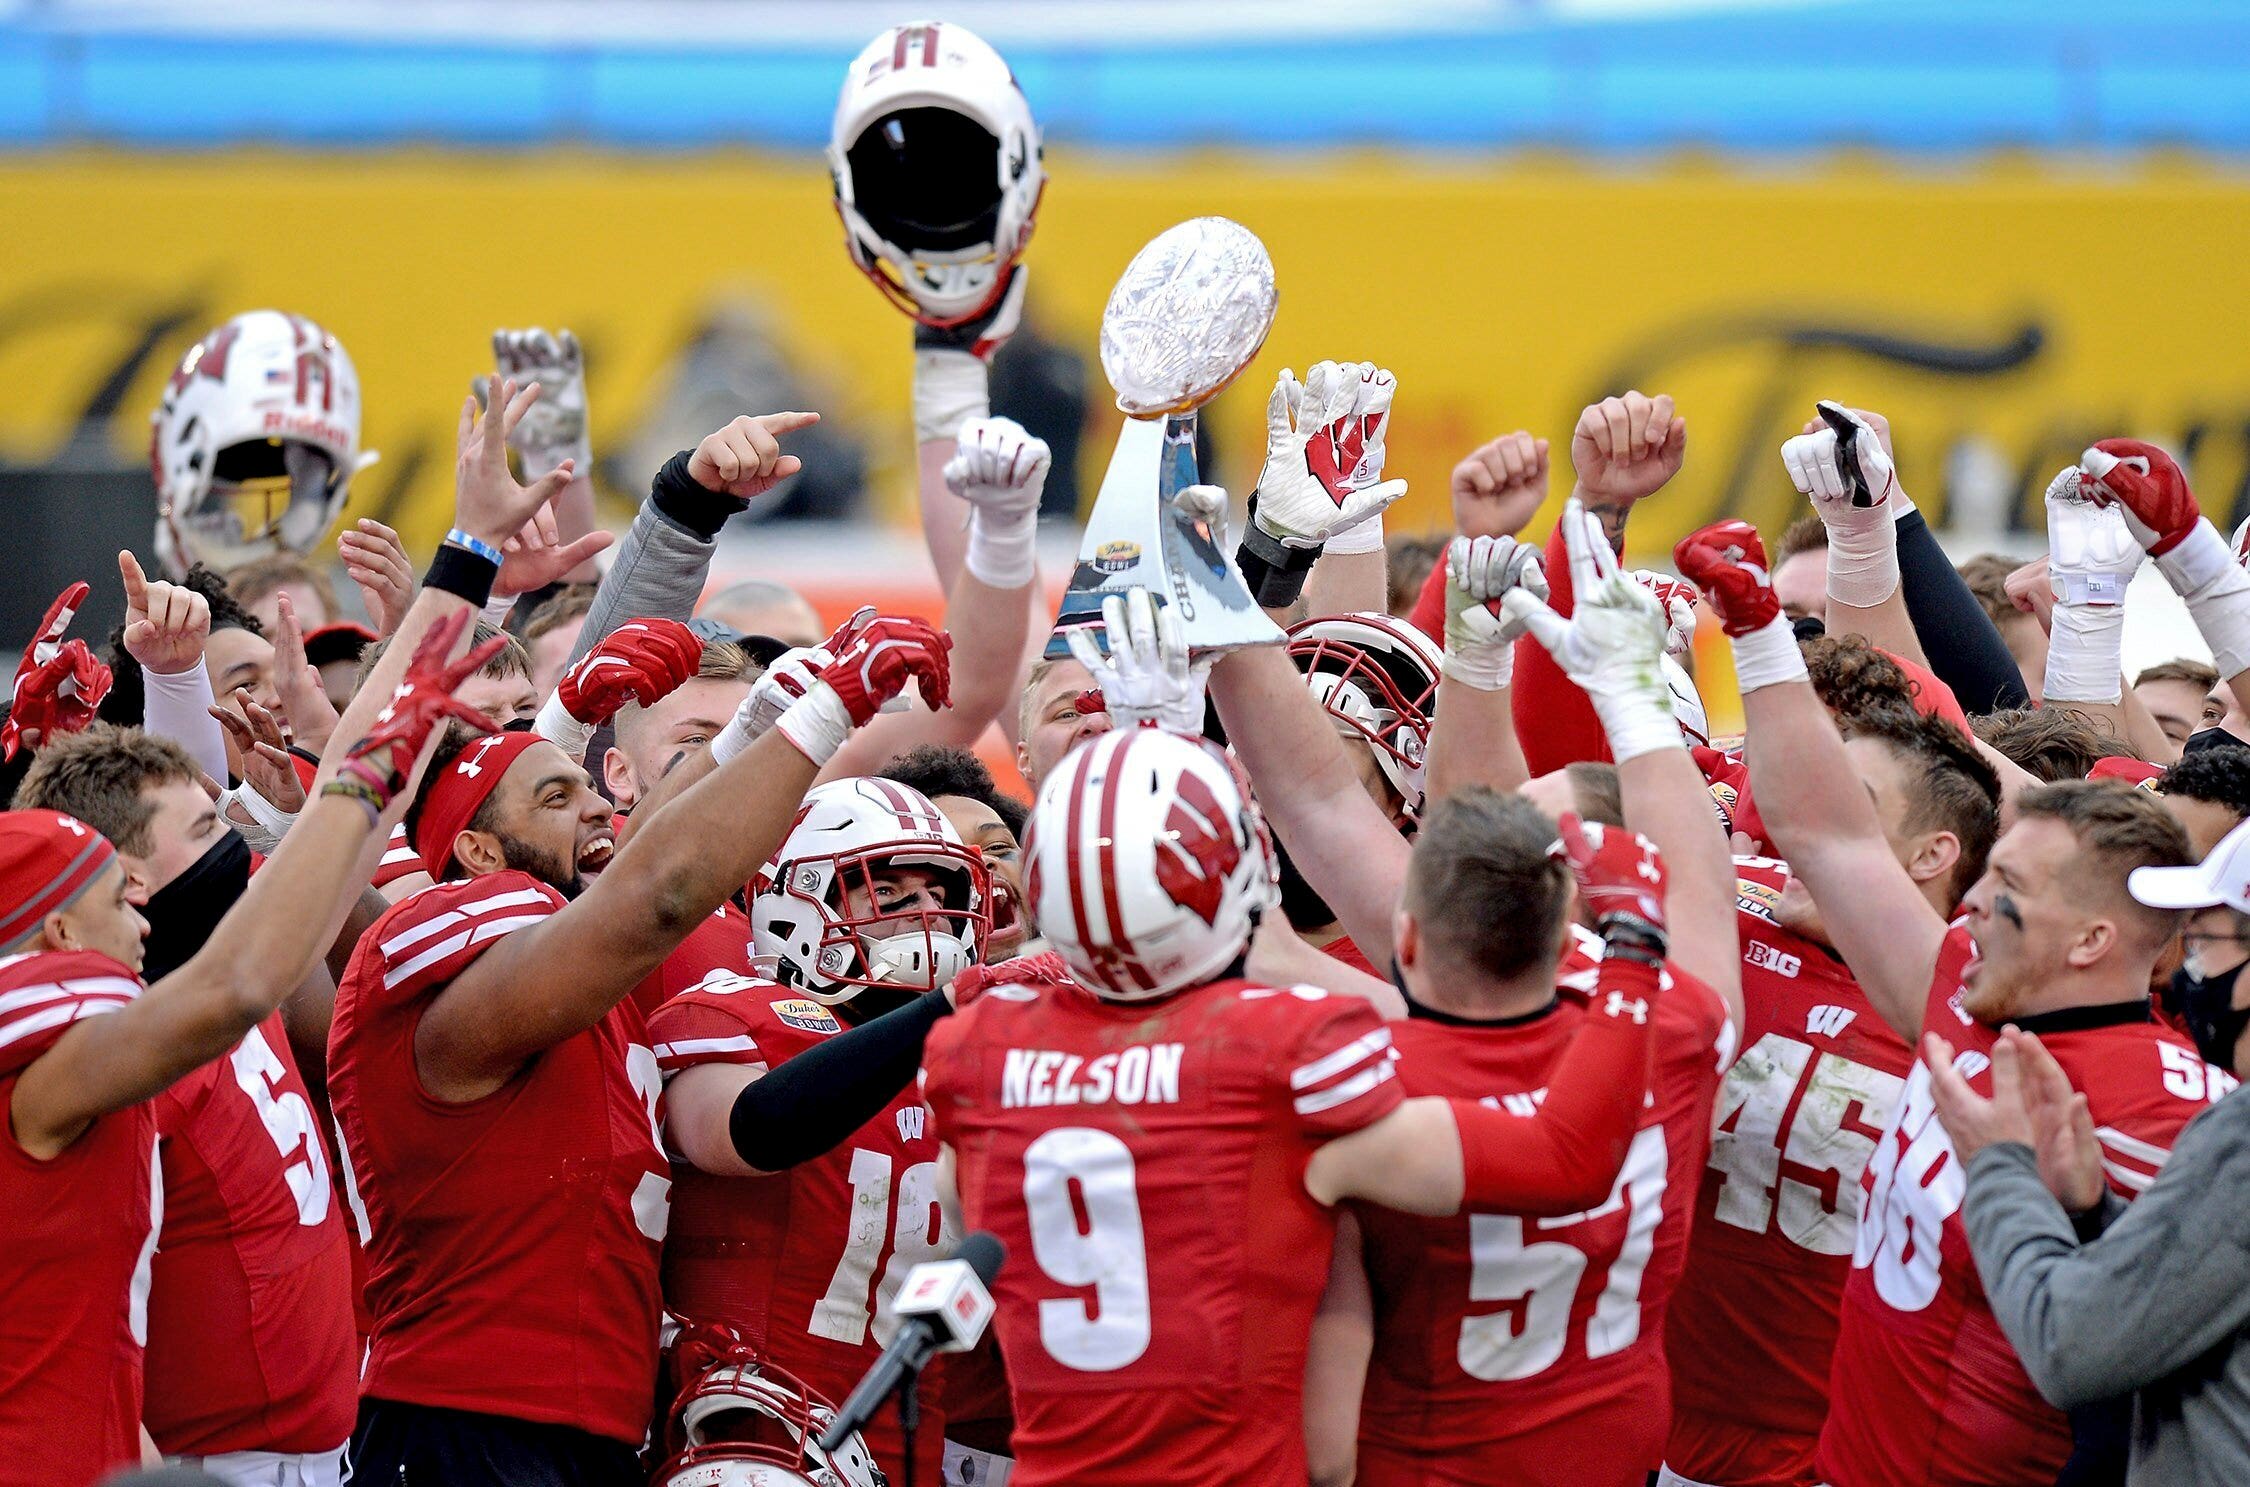 Wisconsin Badgers QB trumps the trophy of the pickup and hits it on the floor, videos show